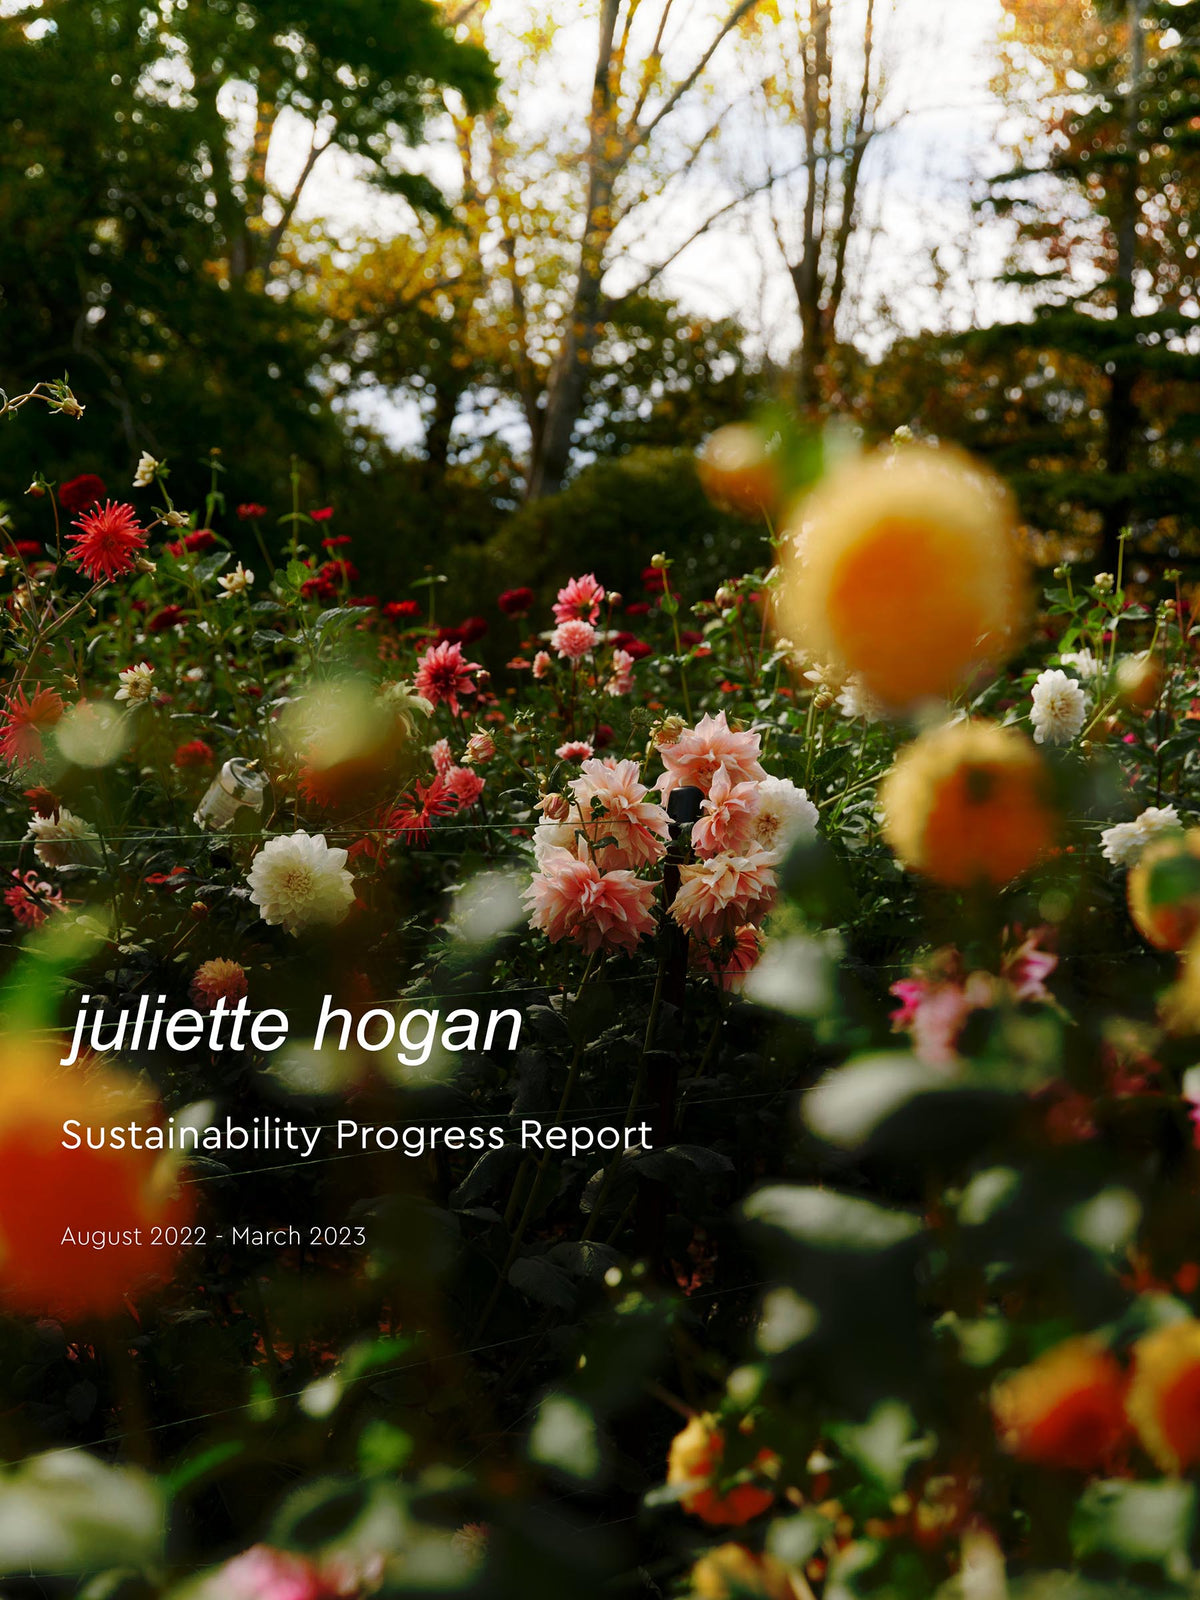 FROM JULIETTE / OUR 2023 SUSTAINABILITY PROGRESS REPORT